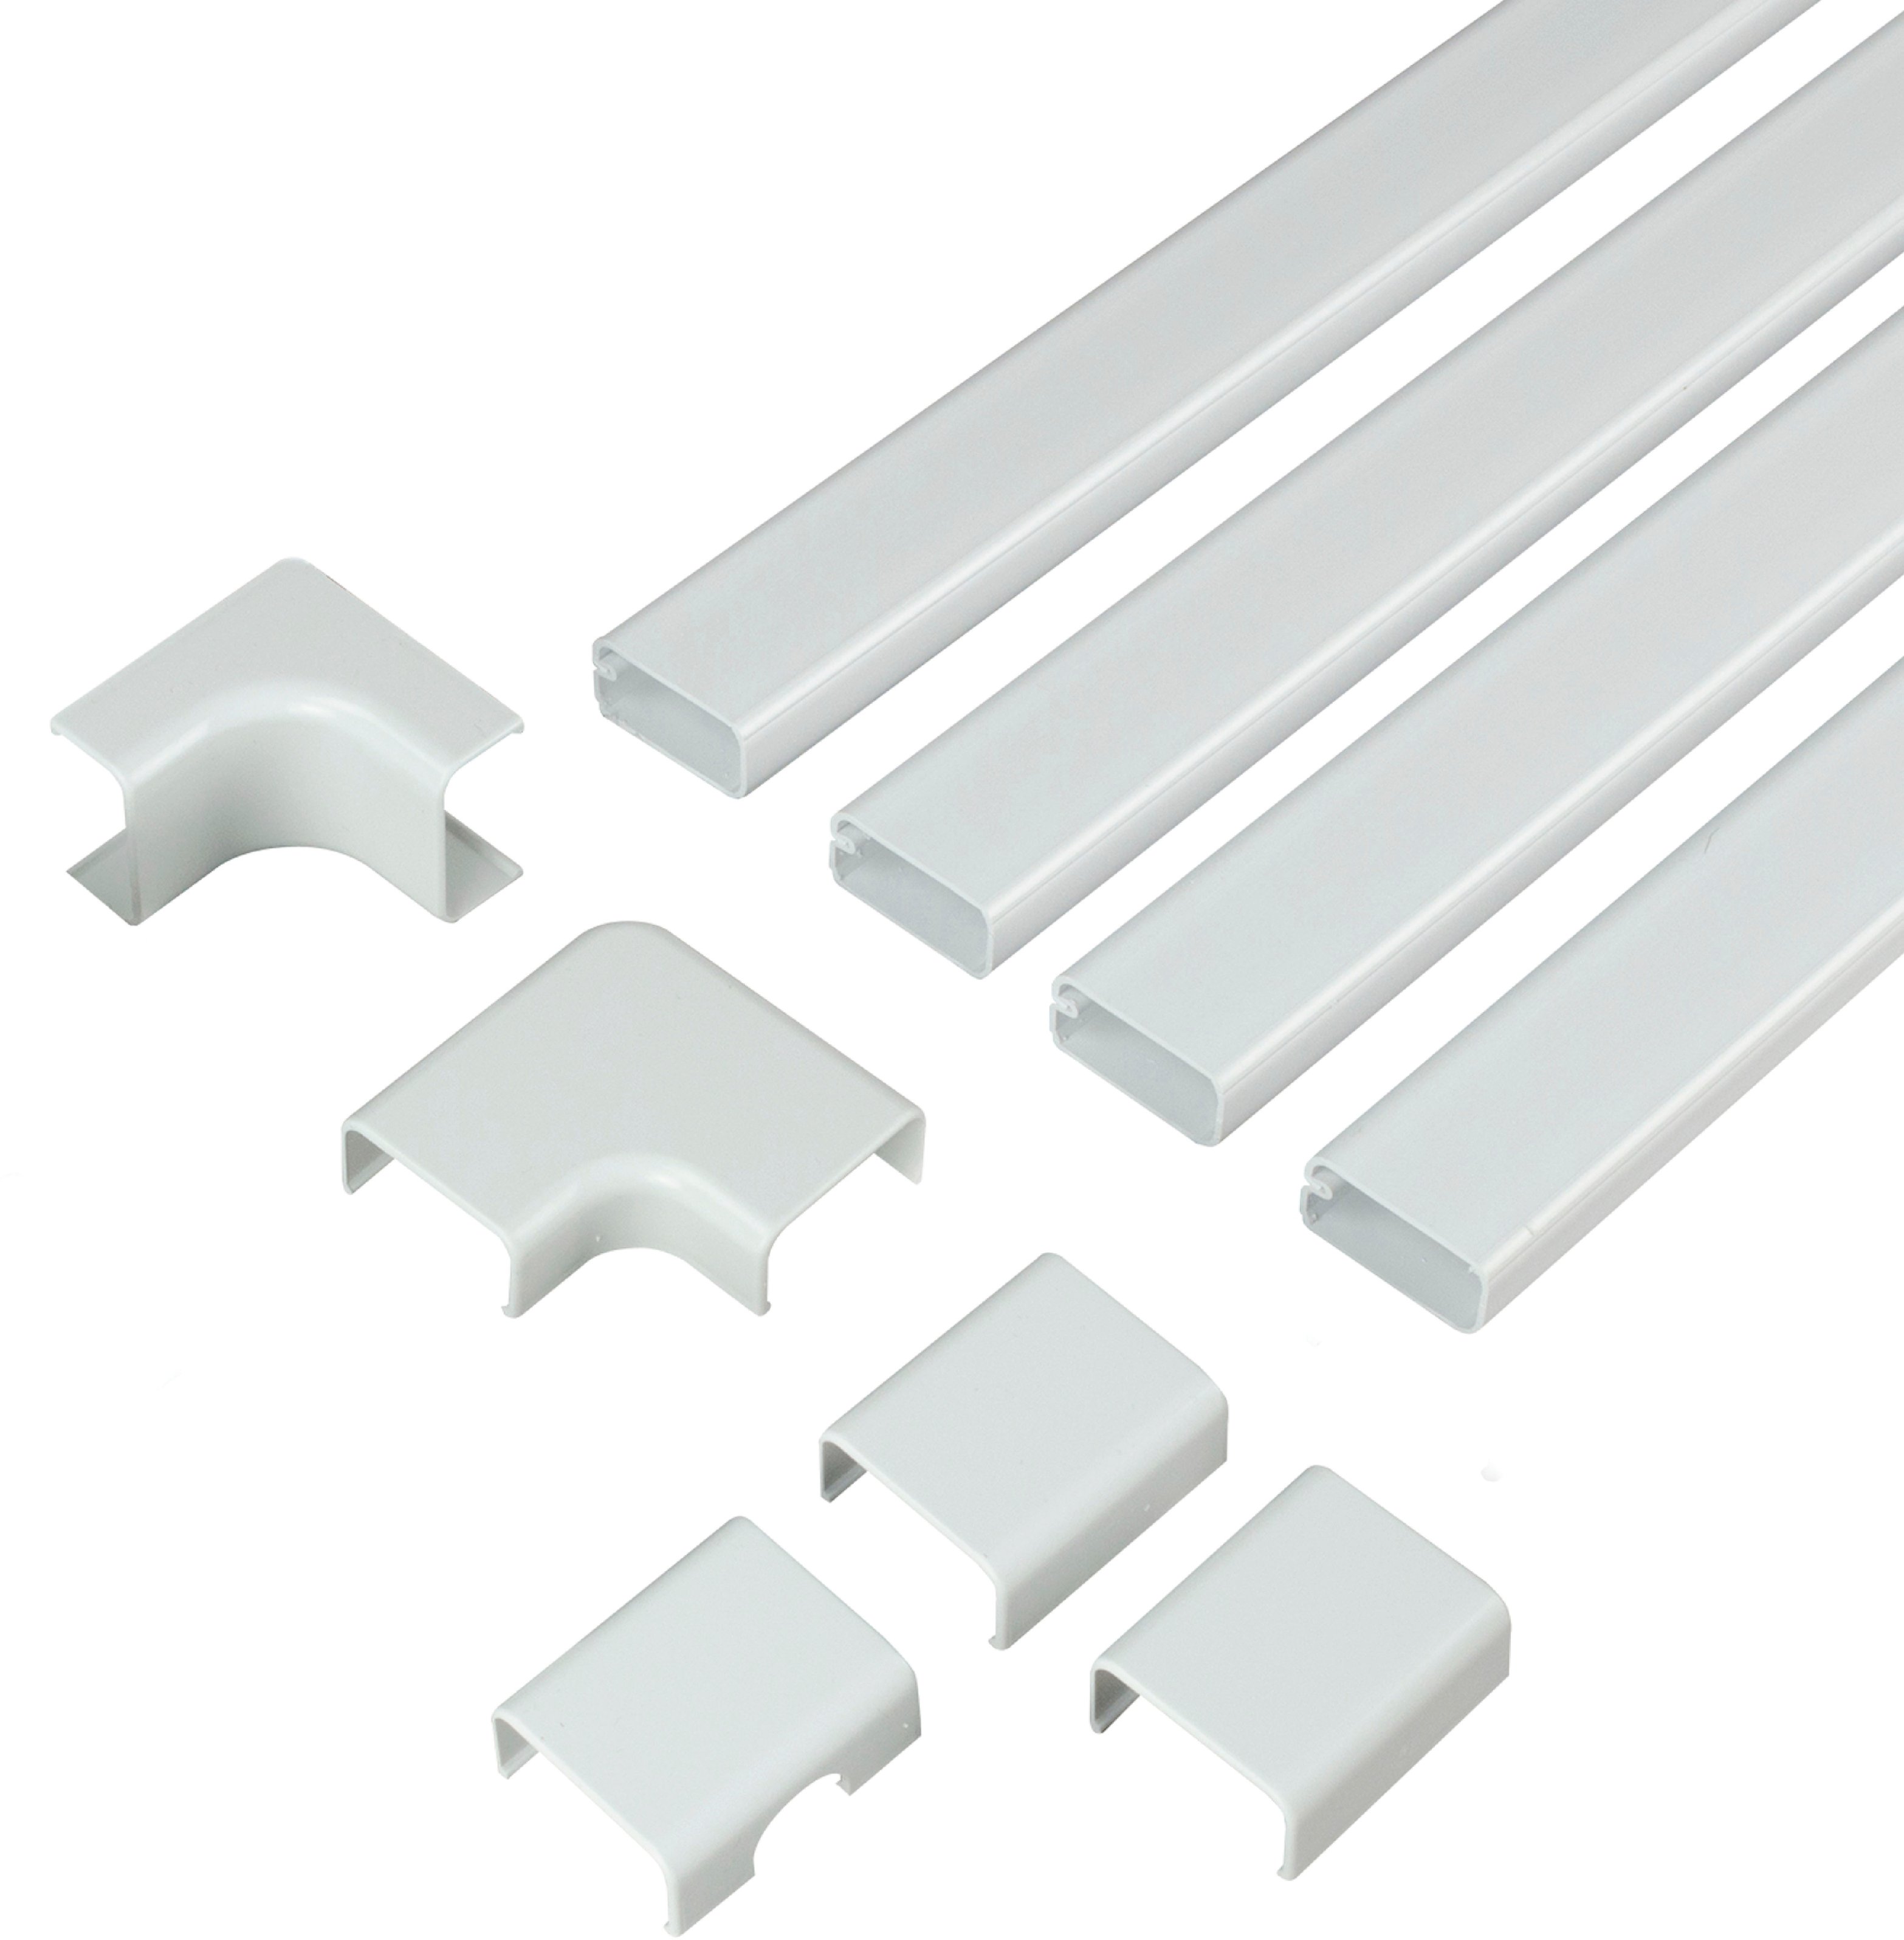 Sanus - On-Wall Cable Concealer High Capacity Cord Cover Kit for Mounted TVs (Holds Up to 6 Cables) - White 6537745